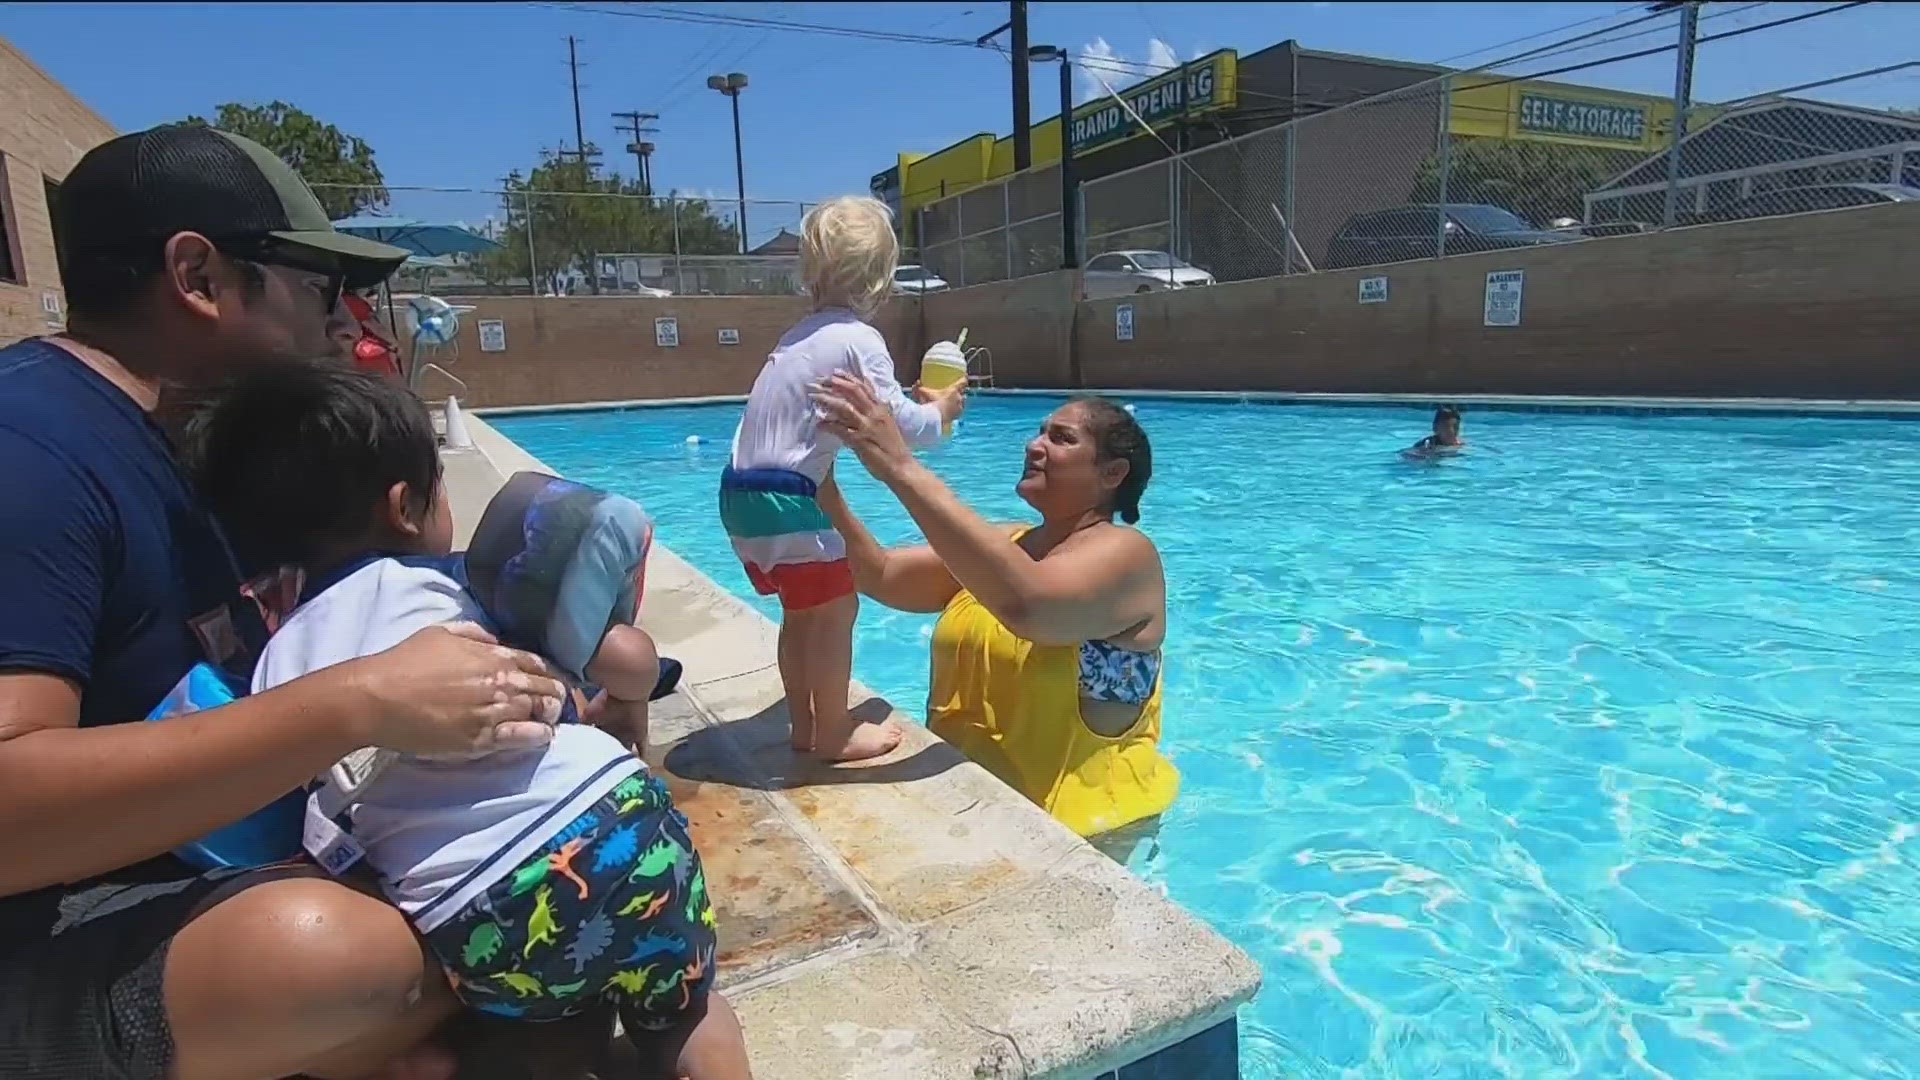 The pool's executive director told CBS 8 in a previous story they couldn't operate this year due to a lifeguard shortage.